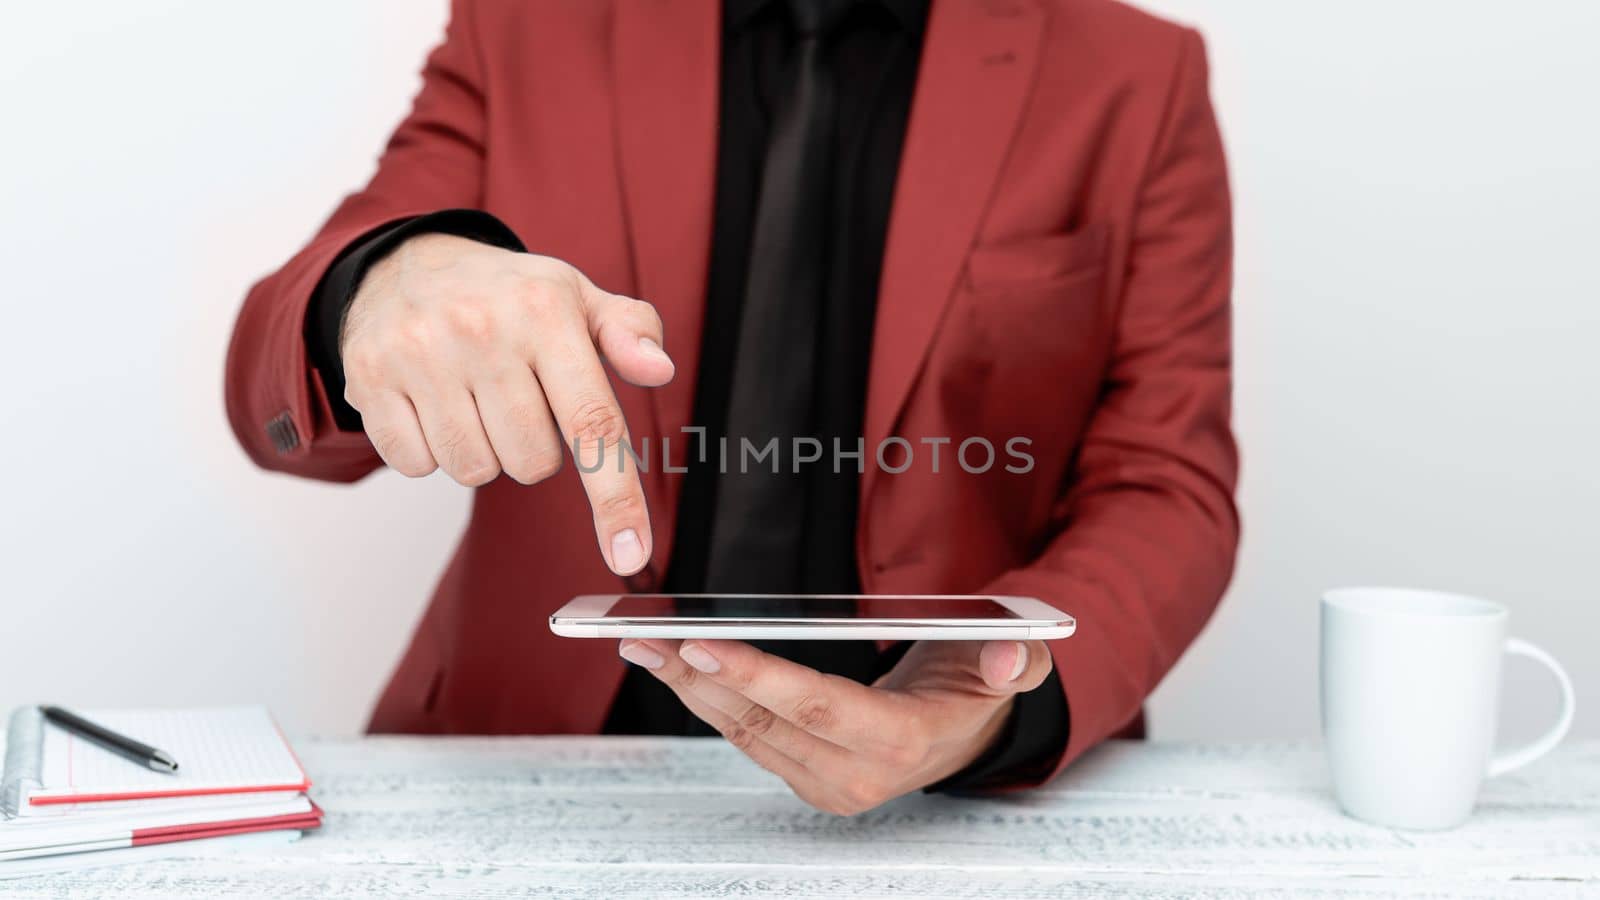 Businessman in a Red jacket sitting at a table holding a mobile phone